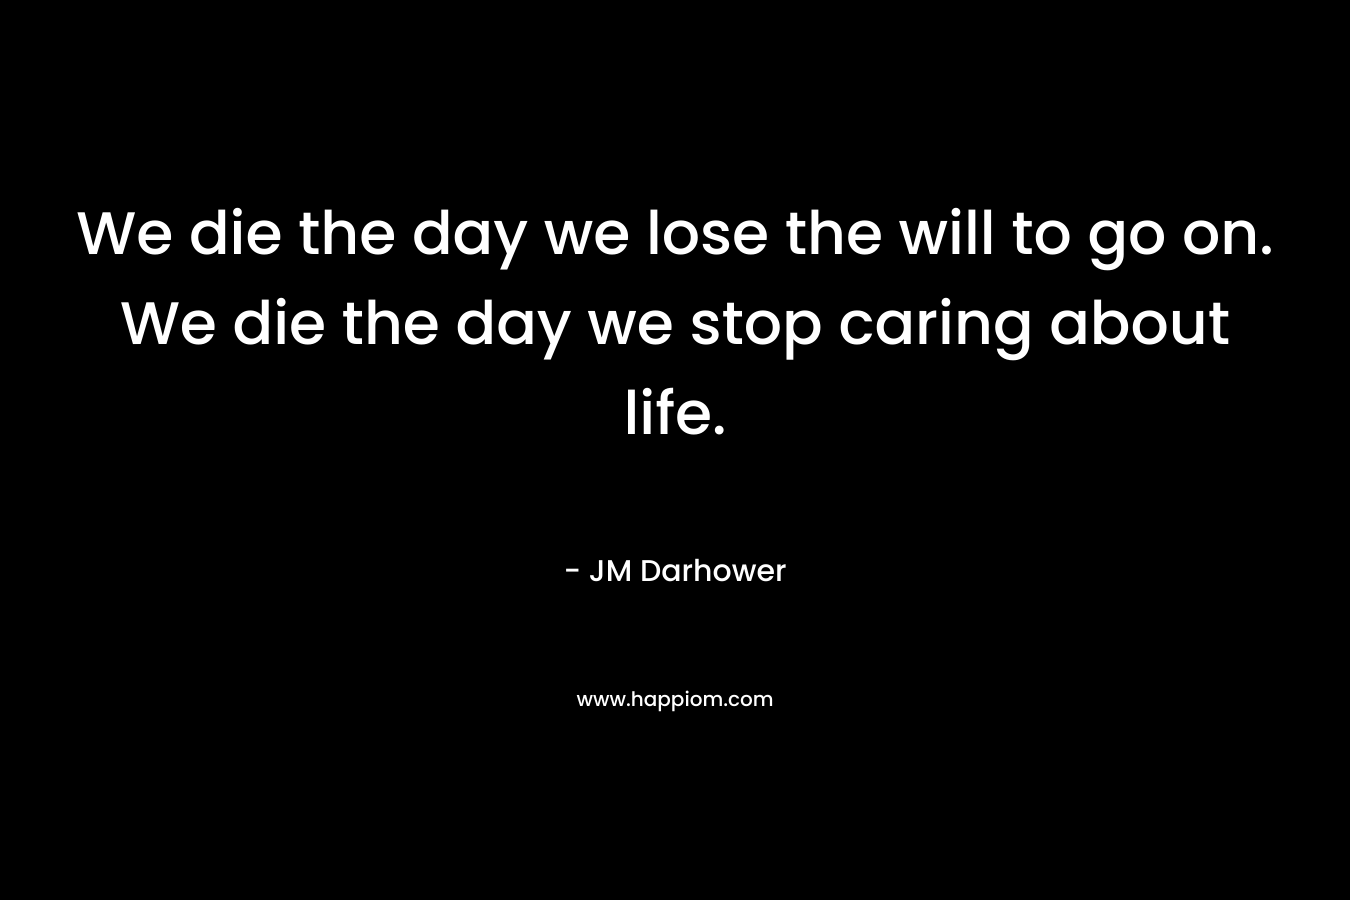 We die the day we lose the will to go on. We die the day we stop caring about life. – JM Darhower